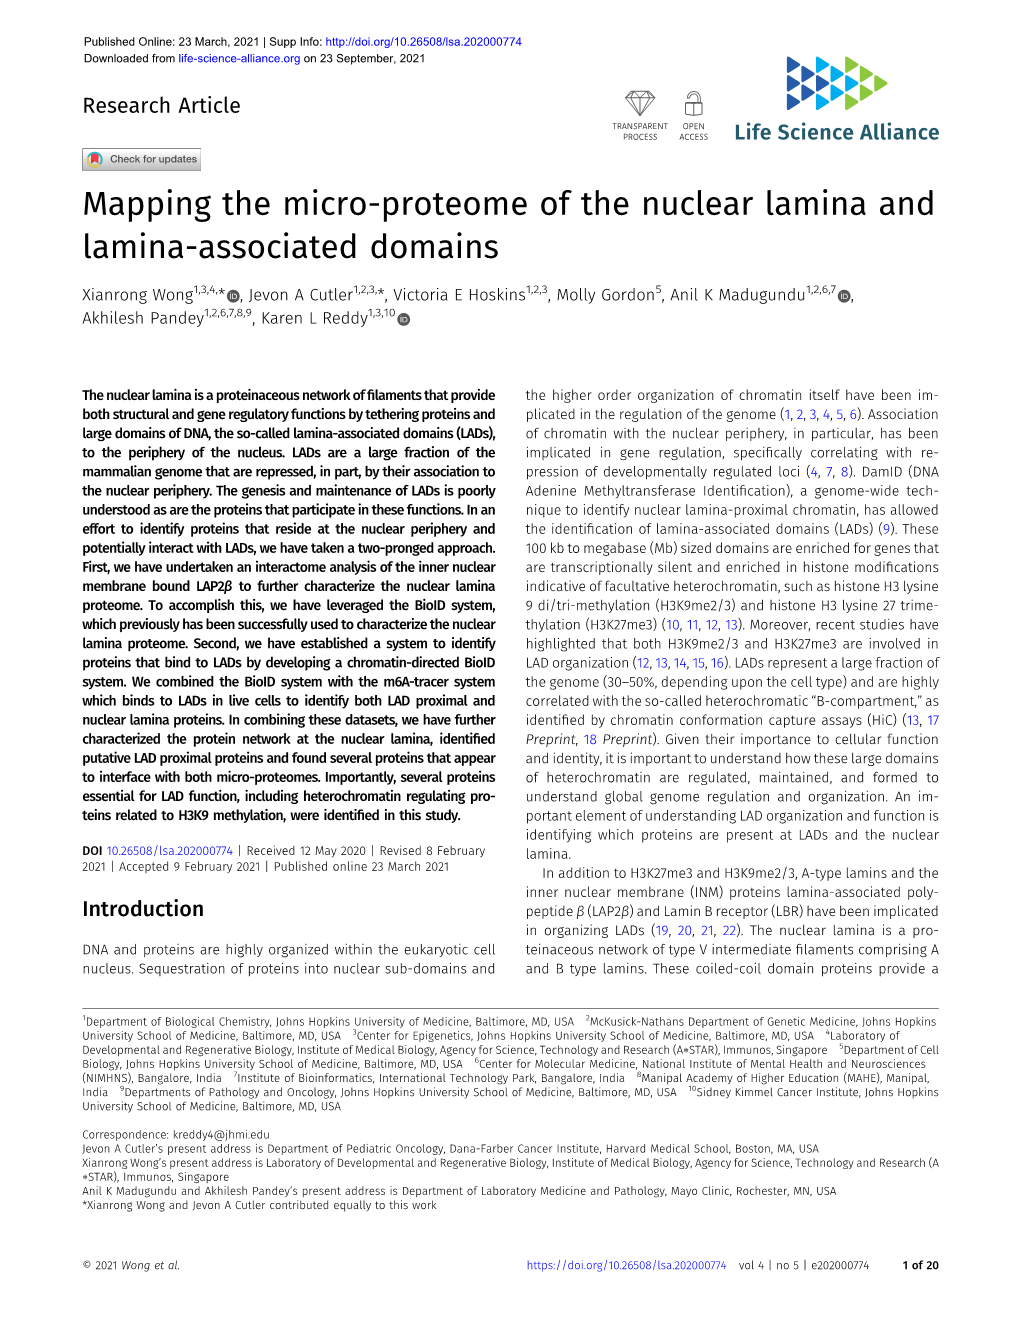 Mapping the Micro-Proteome of the Nuclear Lamina and Lamina-Associated Domains